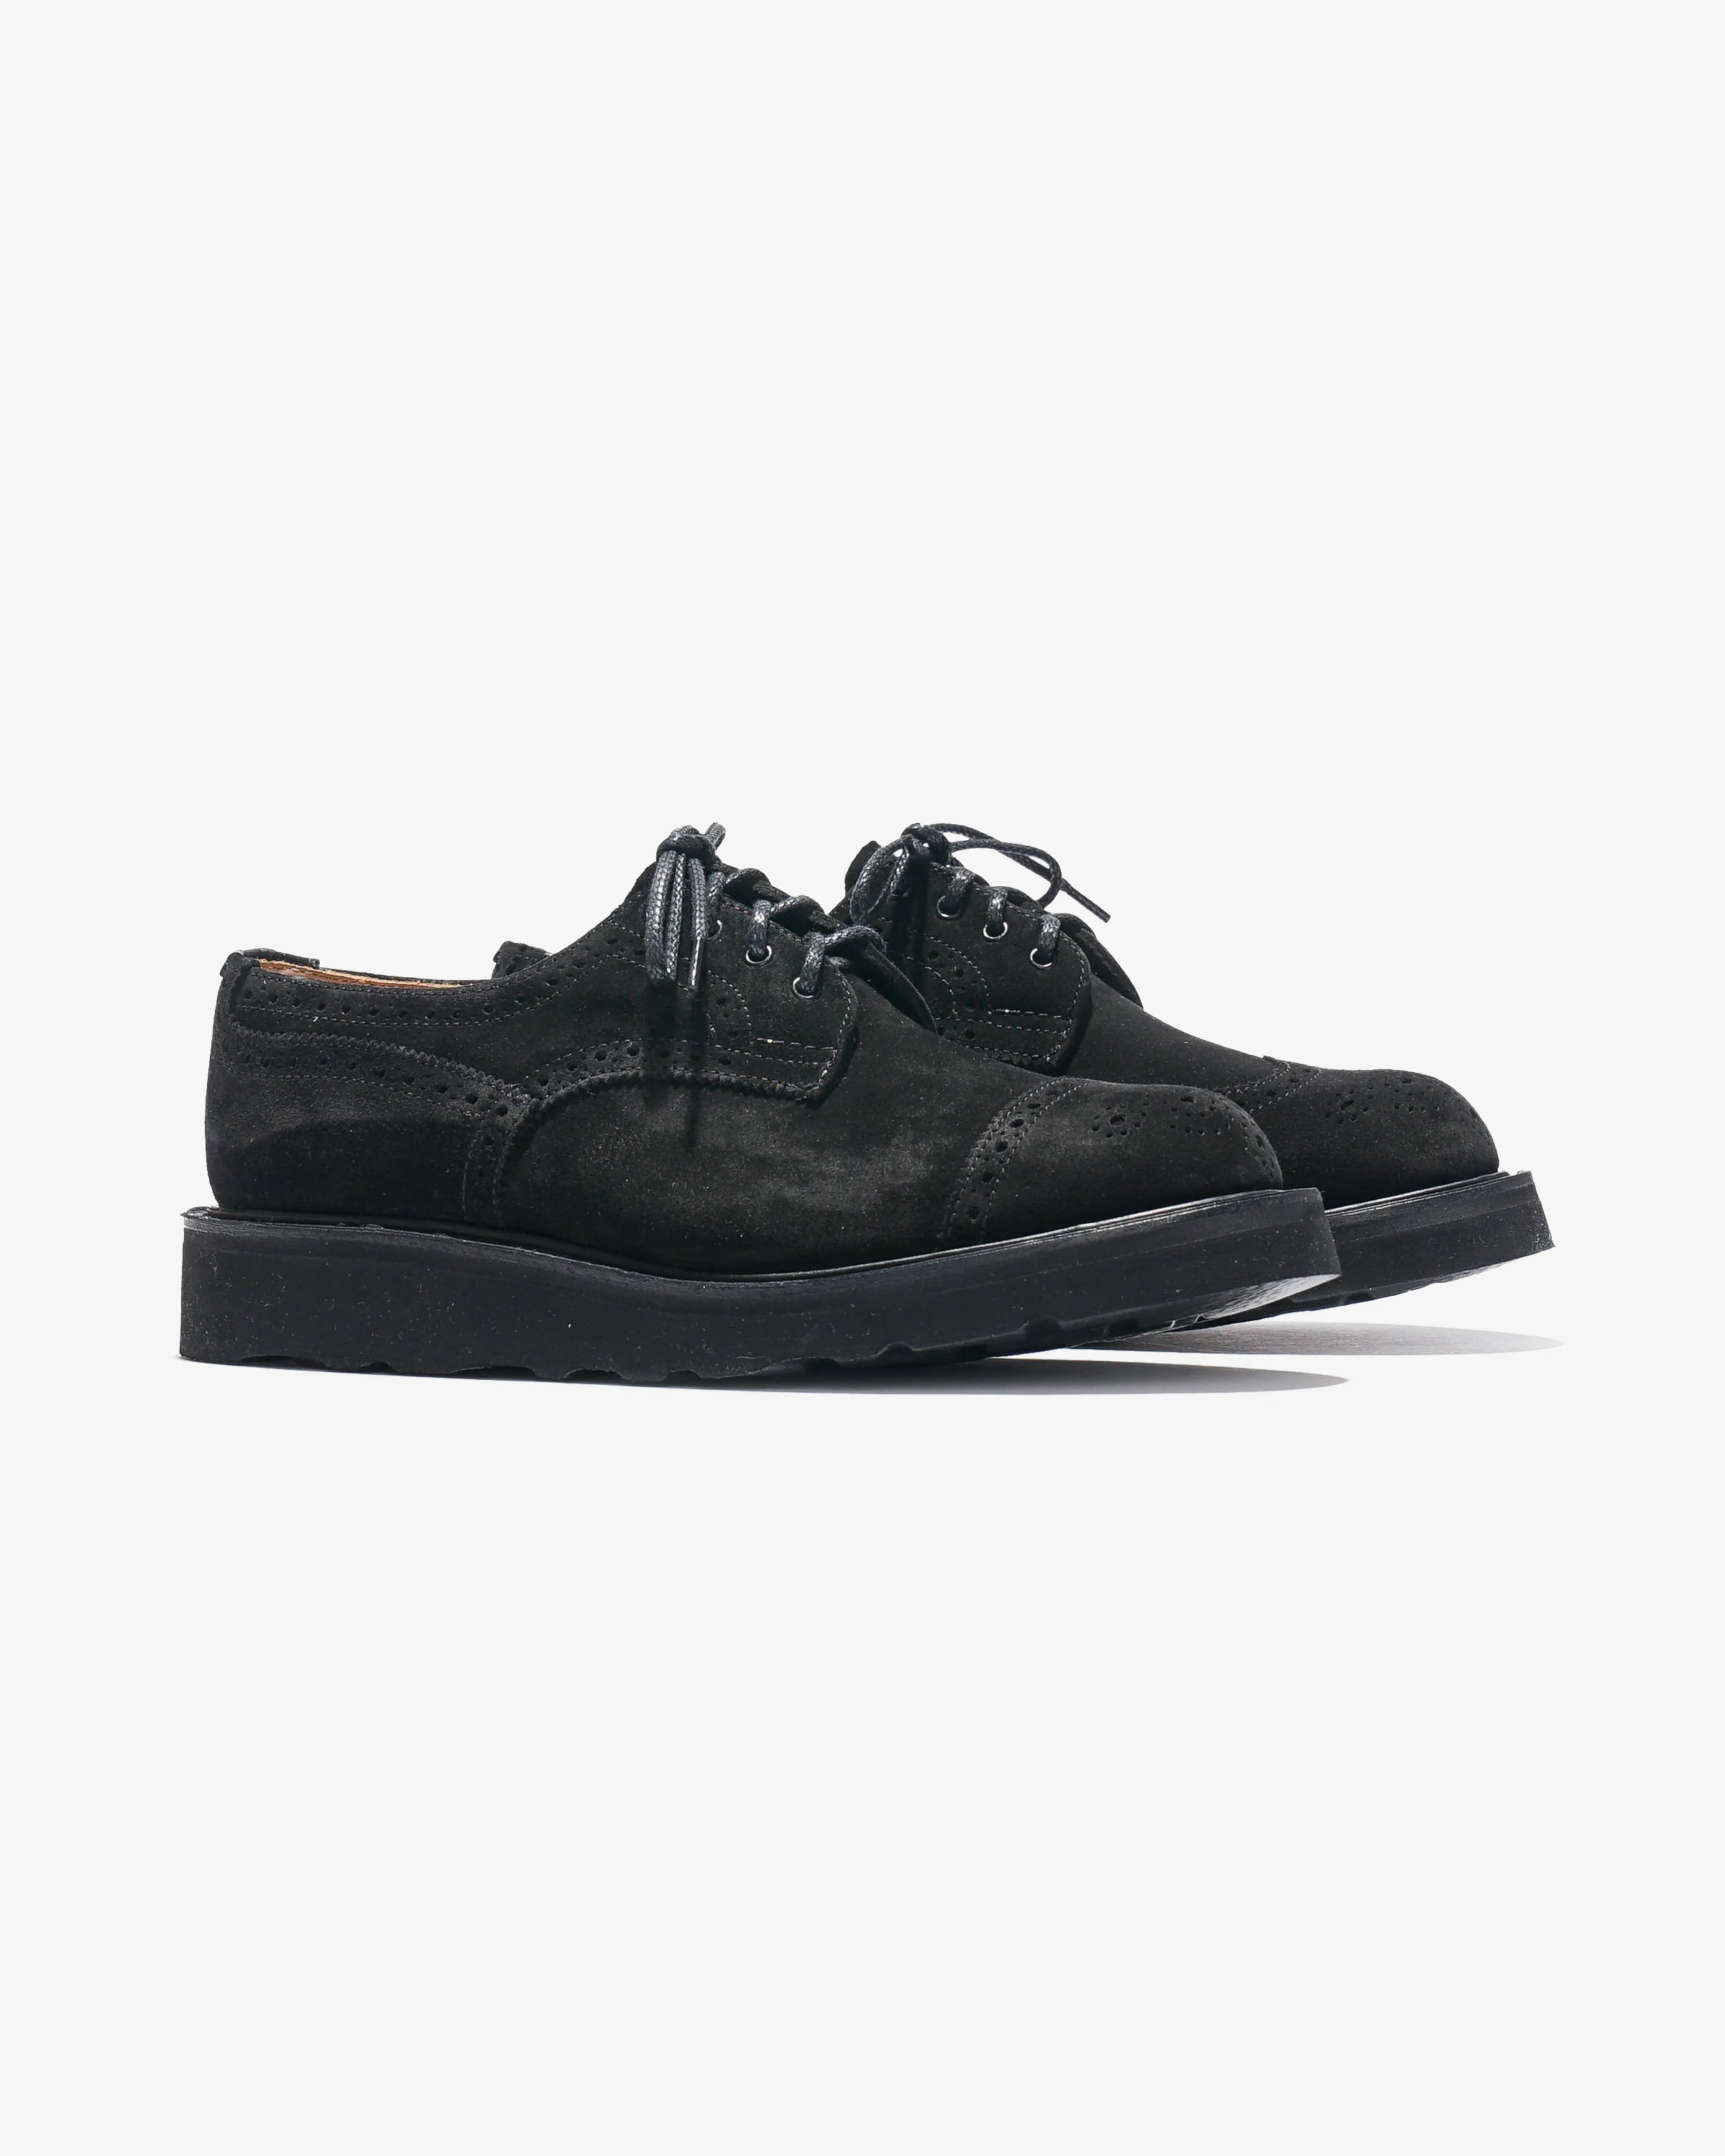 Tricker's x Nepenthes Asymmetric Gibson Brogues - Moreflex Sole - Black Suede